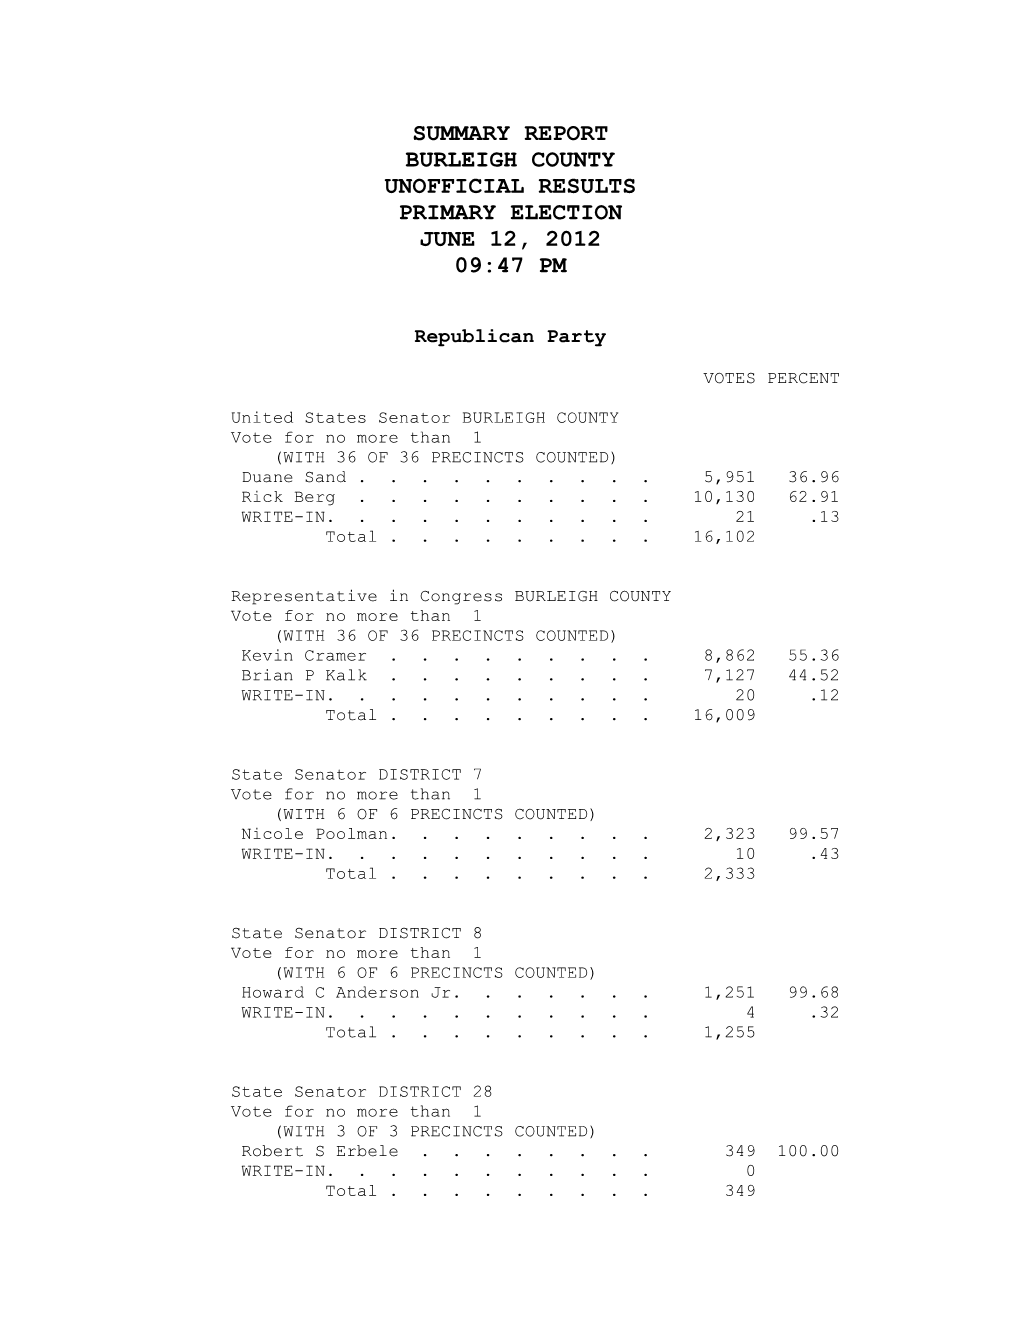 Summary Report Burleigh County Unofficial Results Primary Election June 12, 2012 09:47 Pm